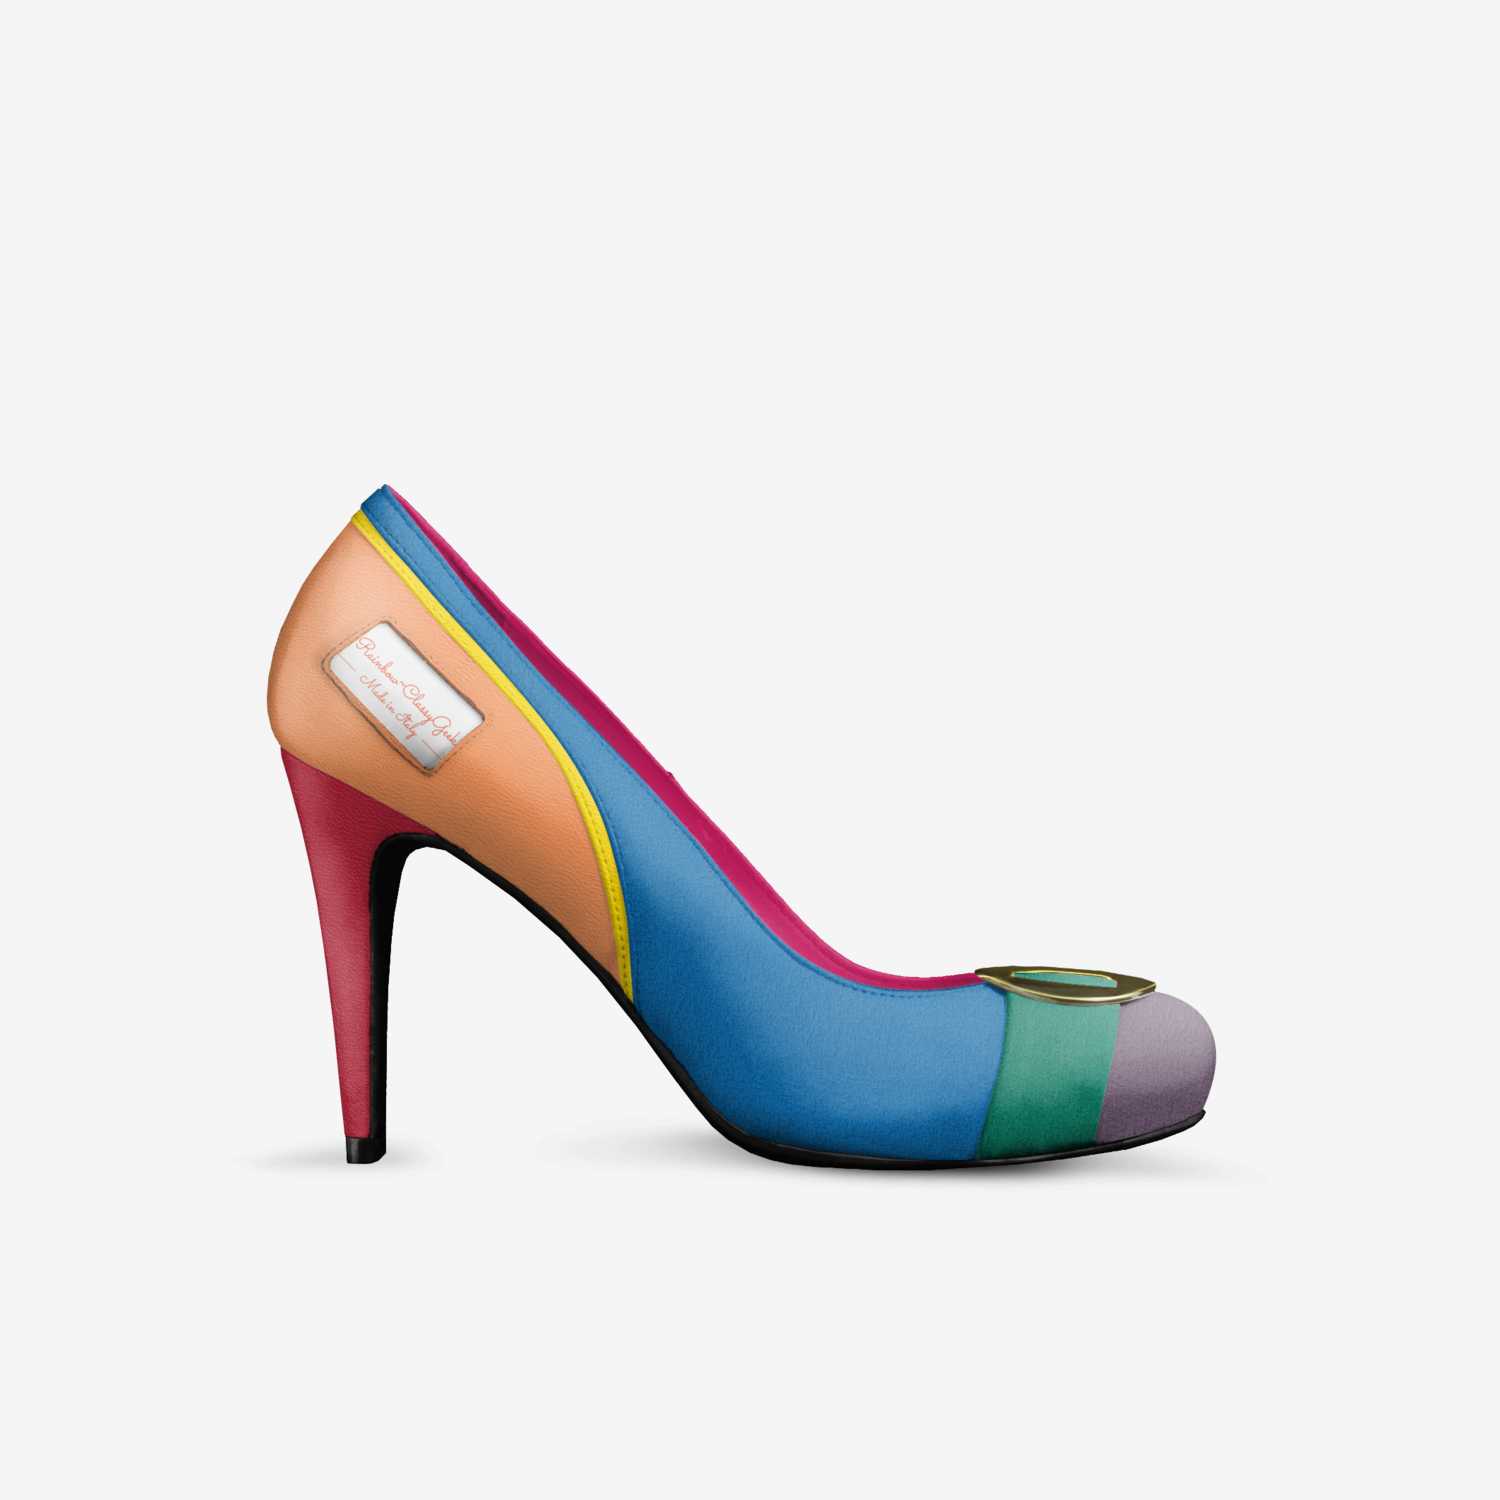 Rainbow~ClassyGeek custom made in Italy shoes by Chavez Mckee | Side view